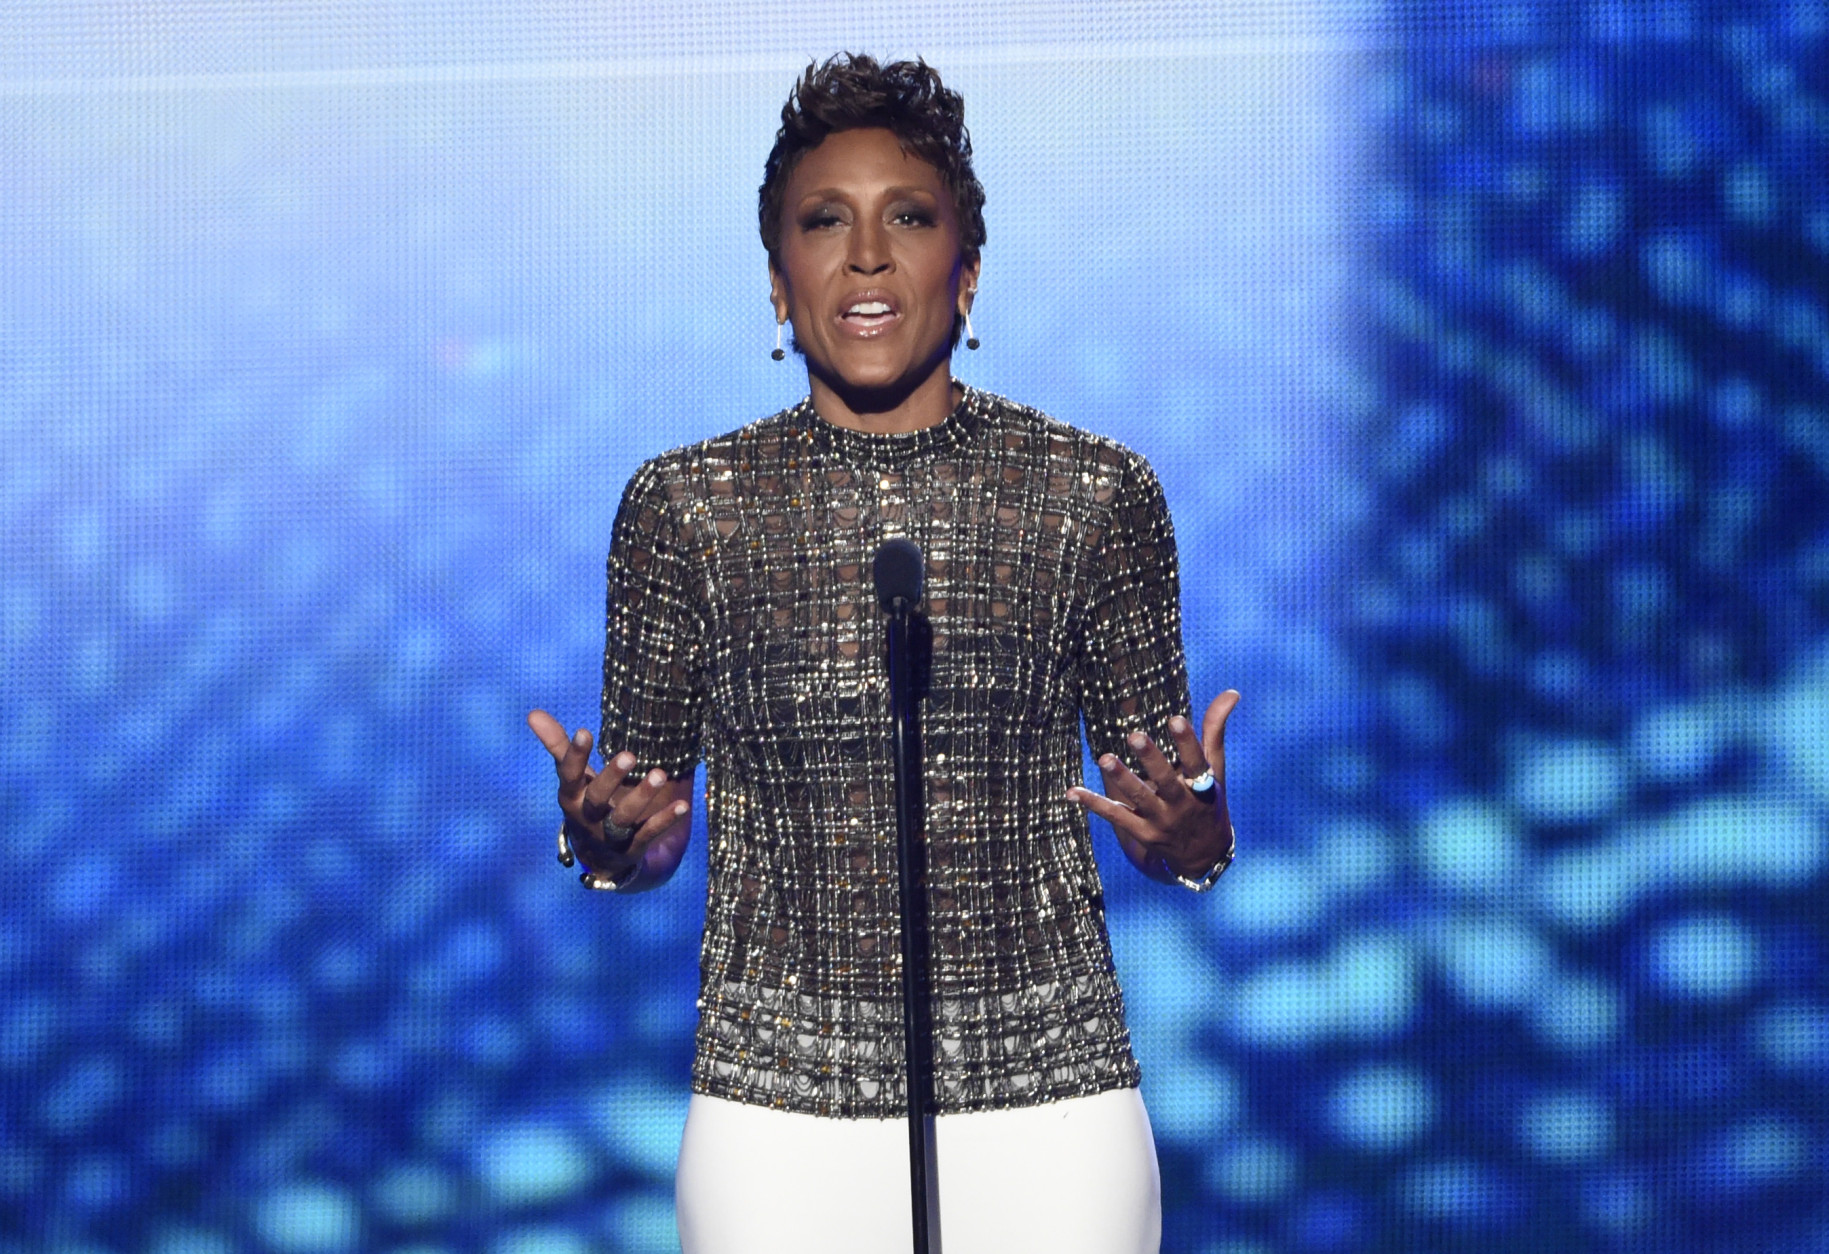 Robin Roberts speaks onstage at the ESPY Awards at the Microsoft Theater on Wednesday, July 15, 2015, in Los Angeles. (Photo by Chris Pizzello/Invision/AP)